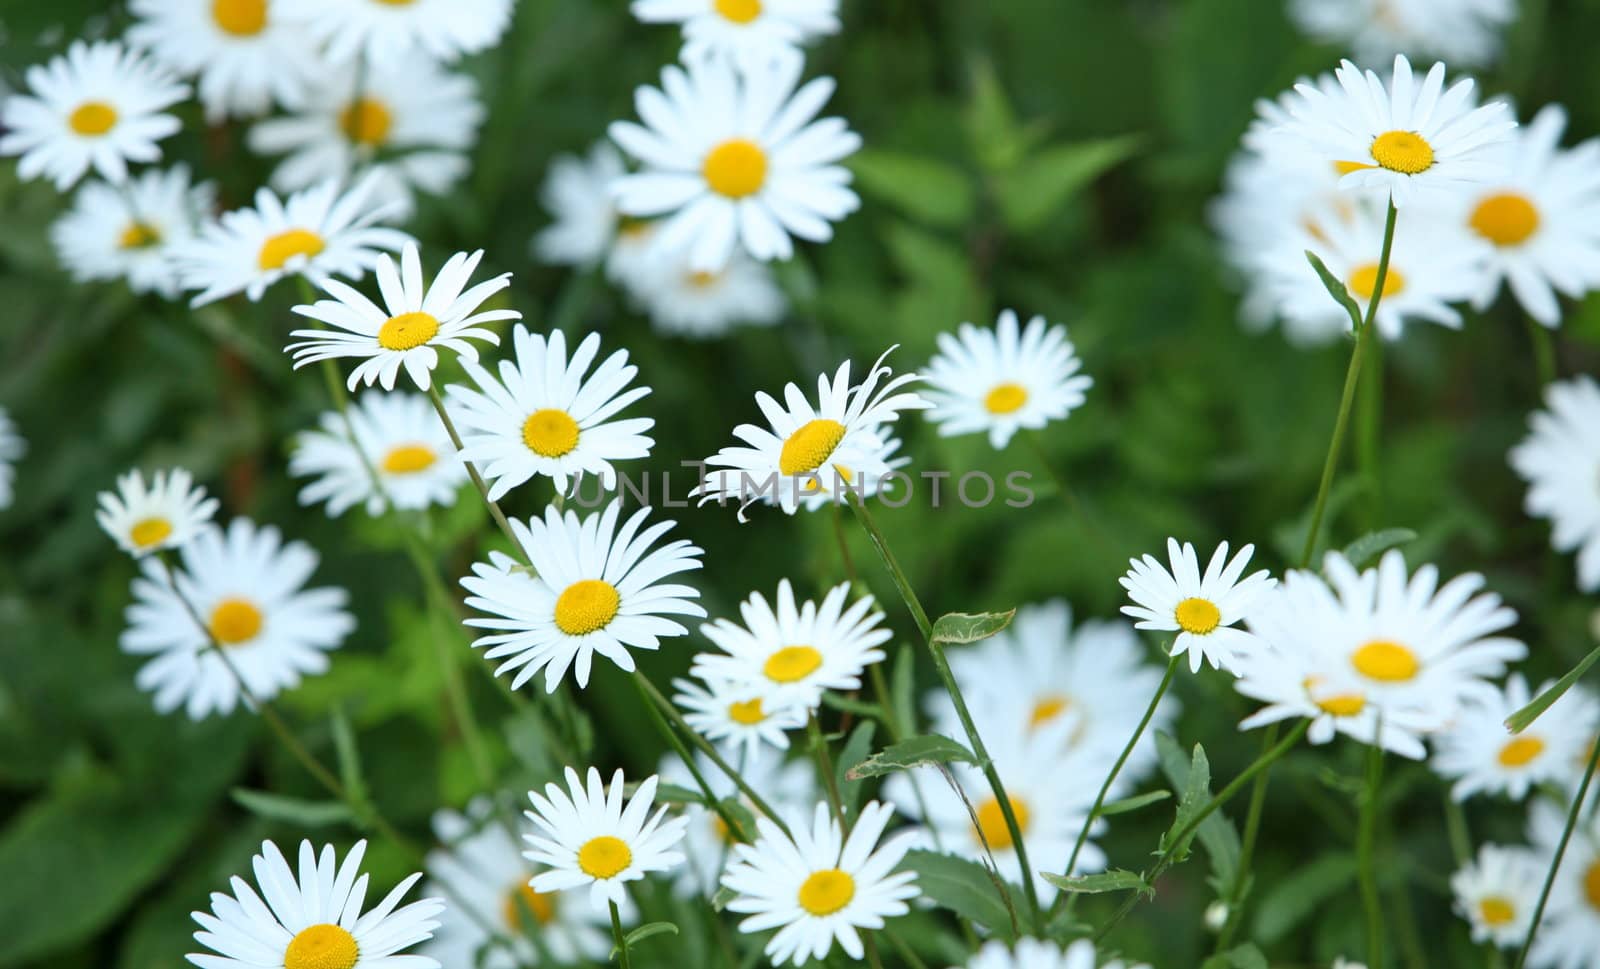 Wild daisies growing in a green field